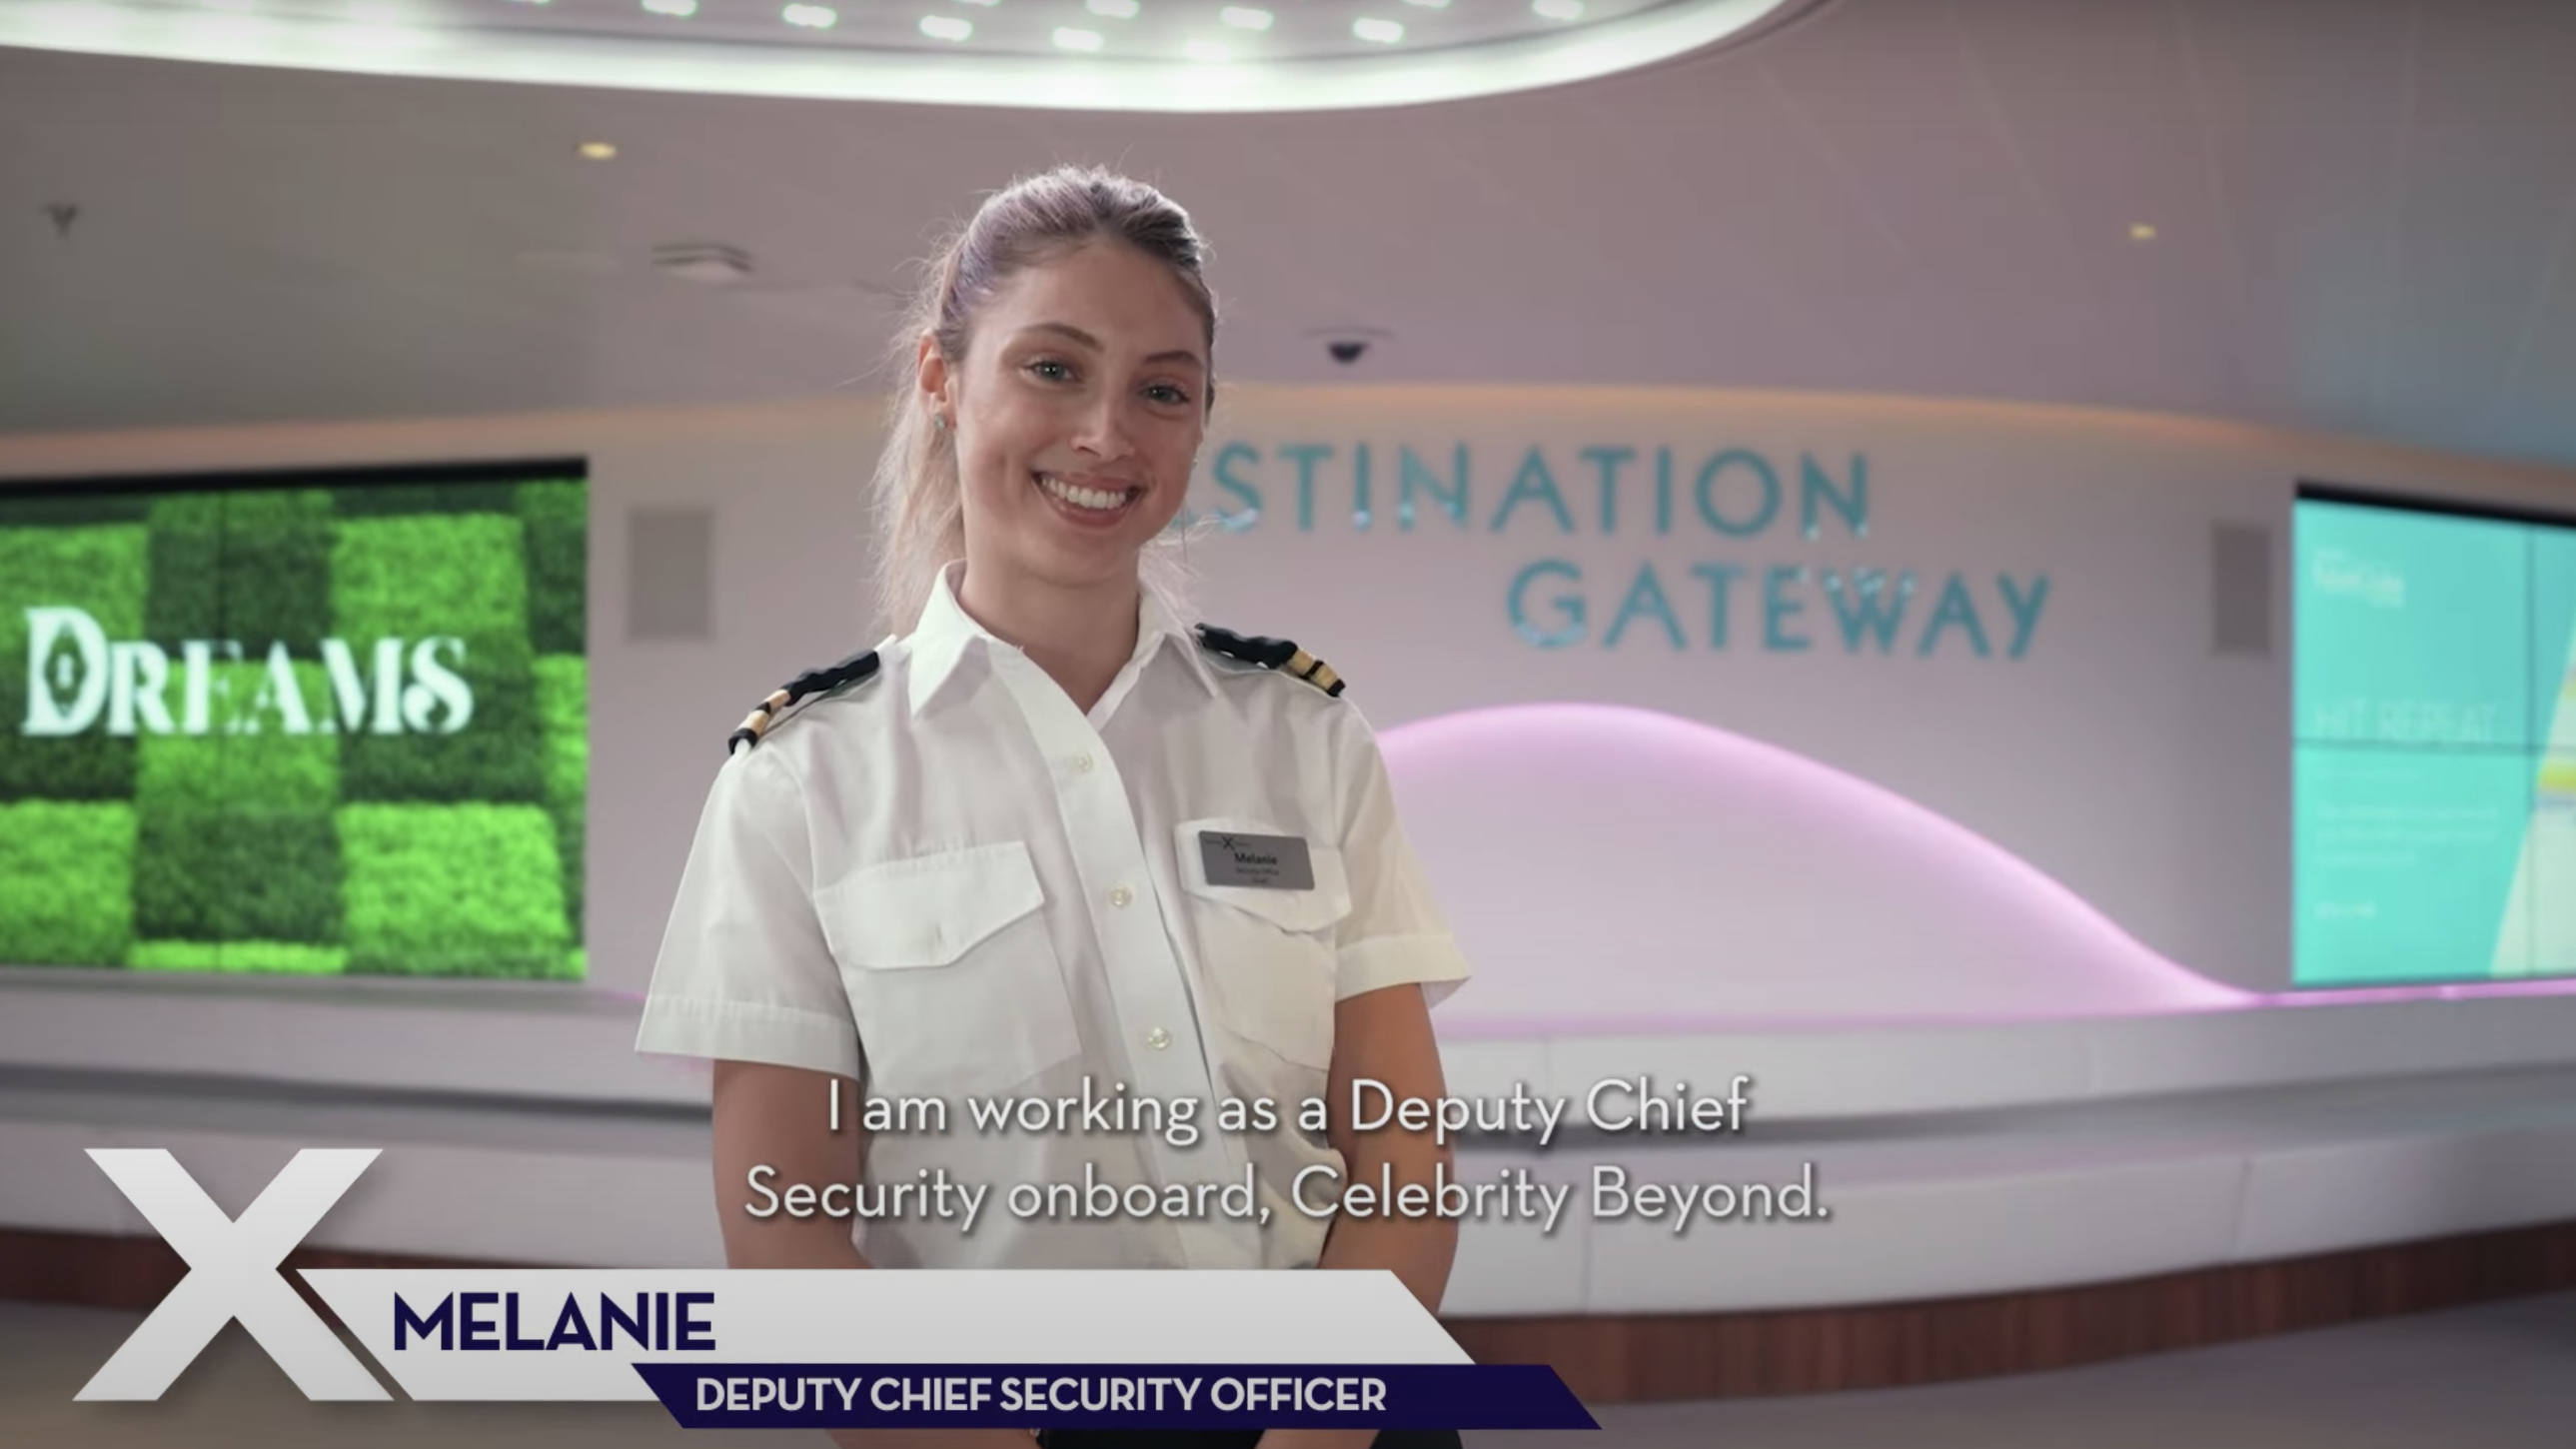 Melanie, our Deputy Chief Security Officer